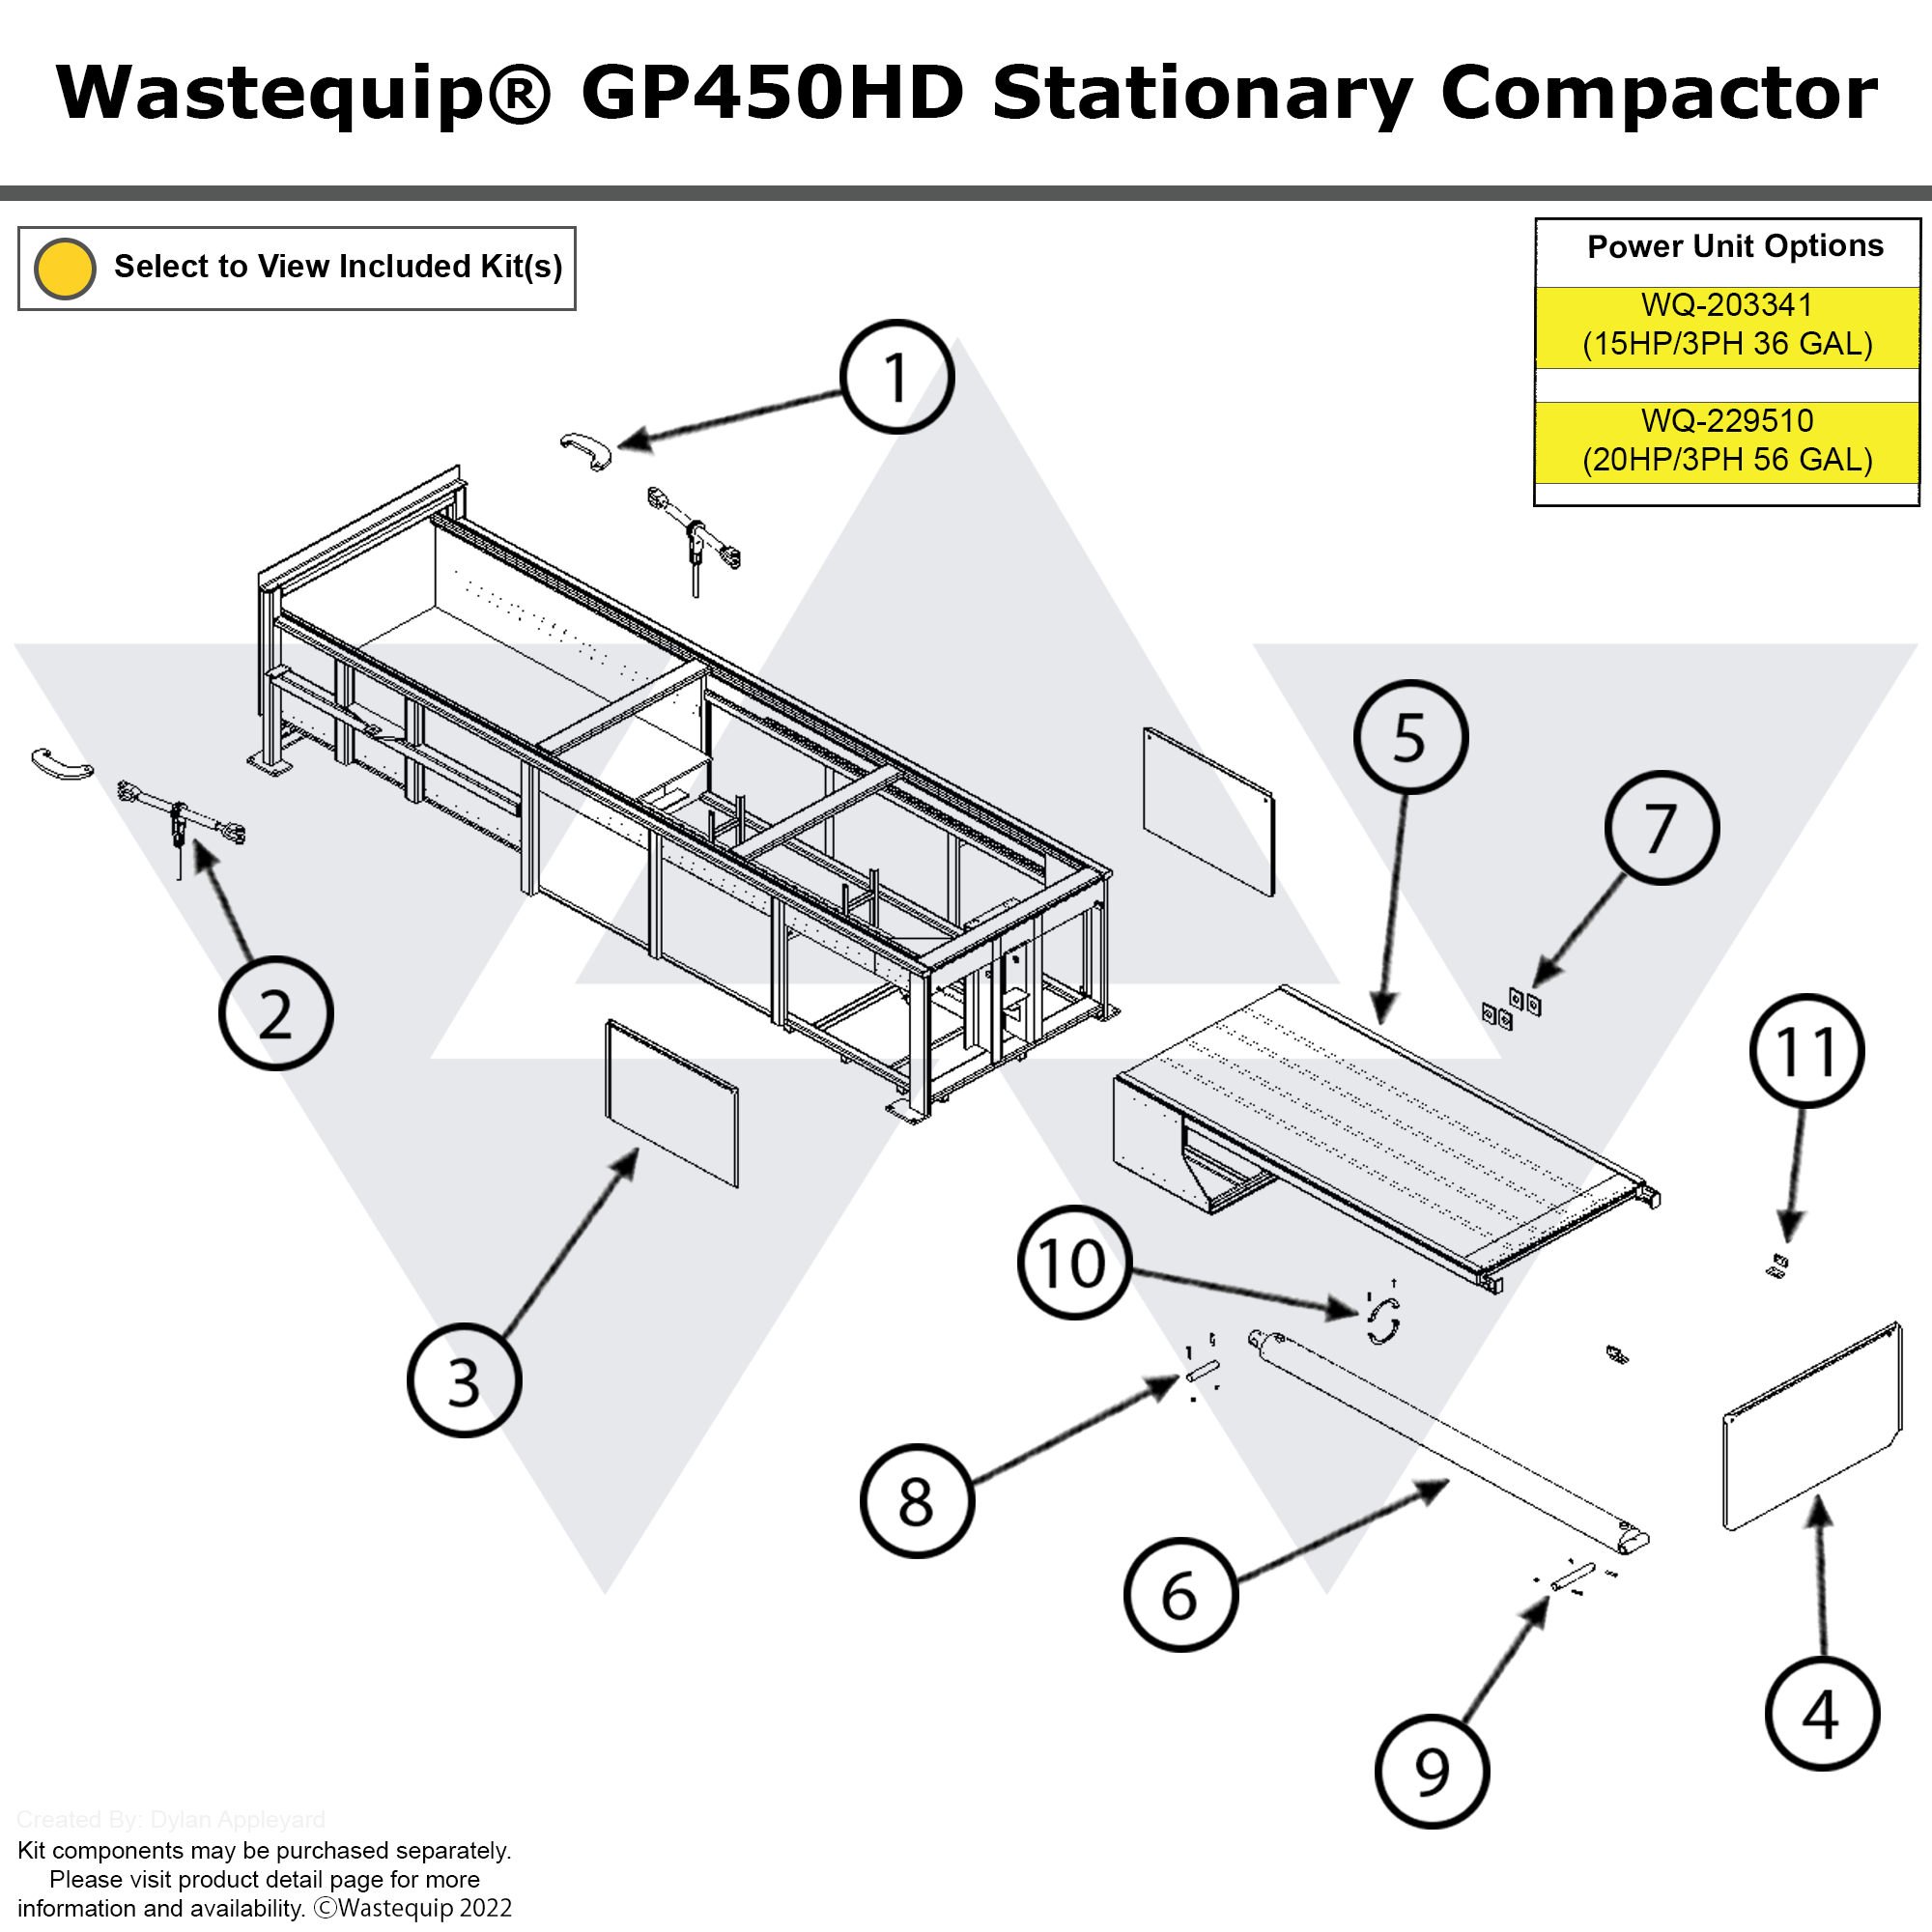 Wastequip® GP450HD Stationary Compactor